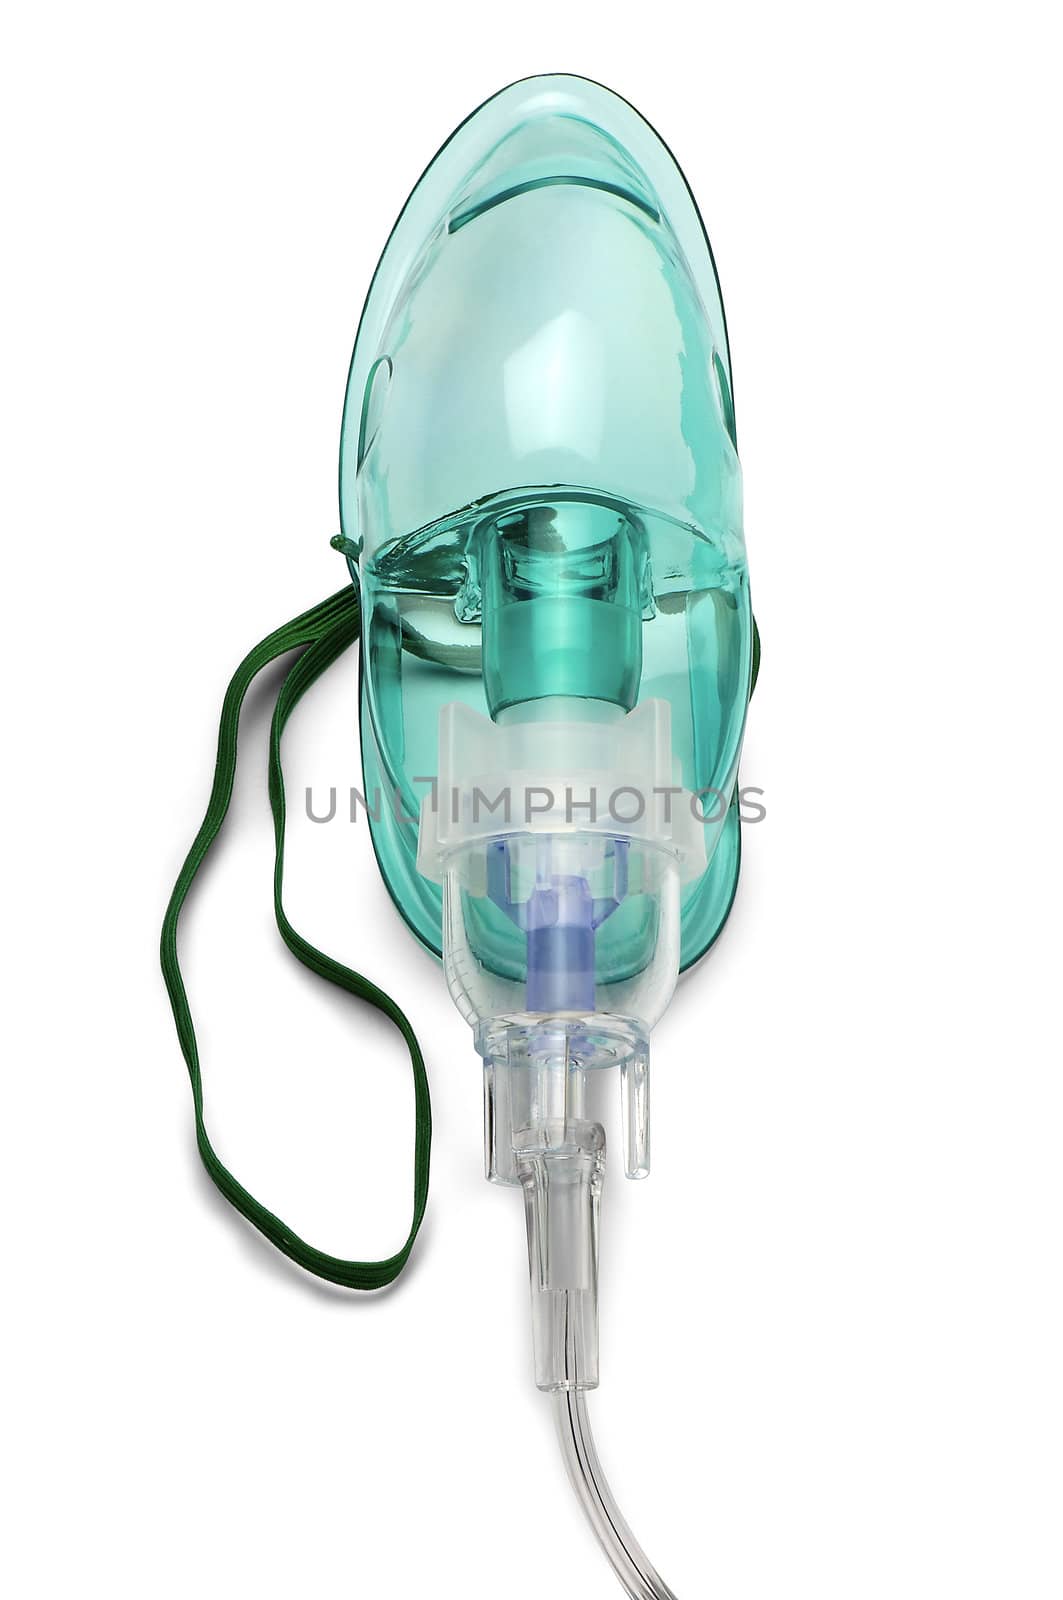 Close up image of an oxygen mask from front.